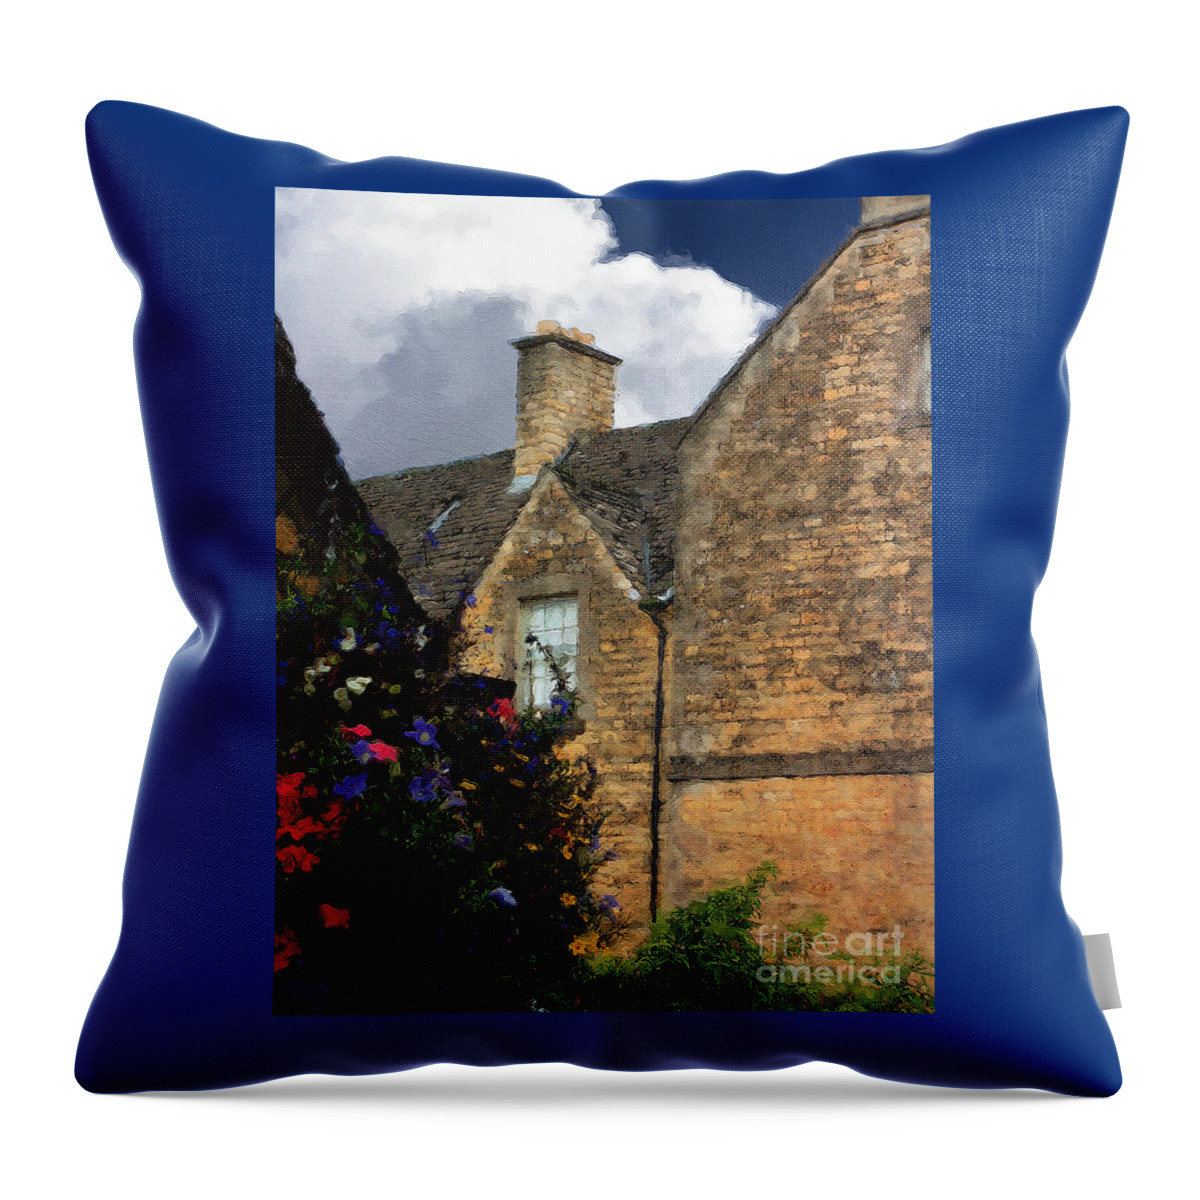 Bourton-on-the-water Throw Pillow featuring the photograph Bourton Back Alley by Brian Watt